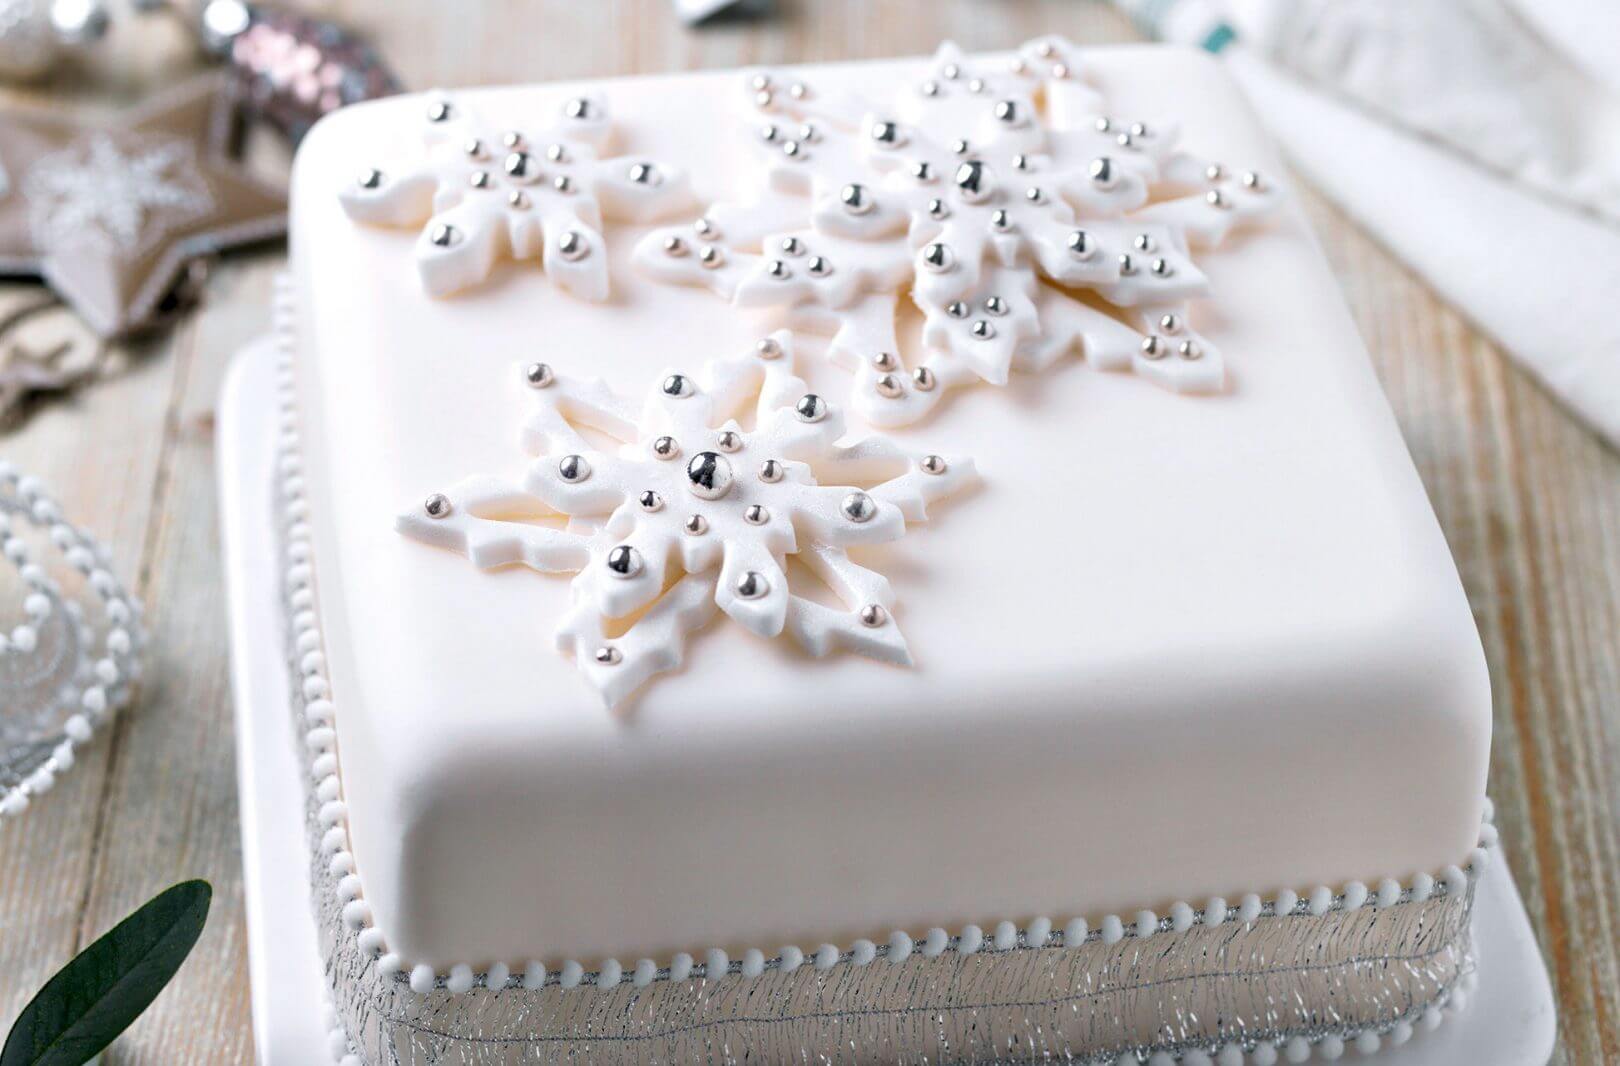 Glittering snowflake cake by Good To Know